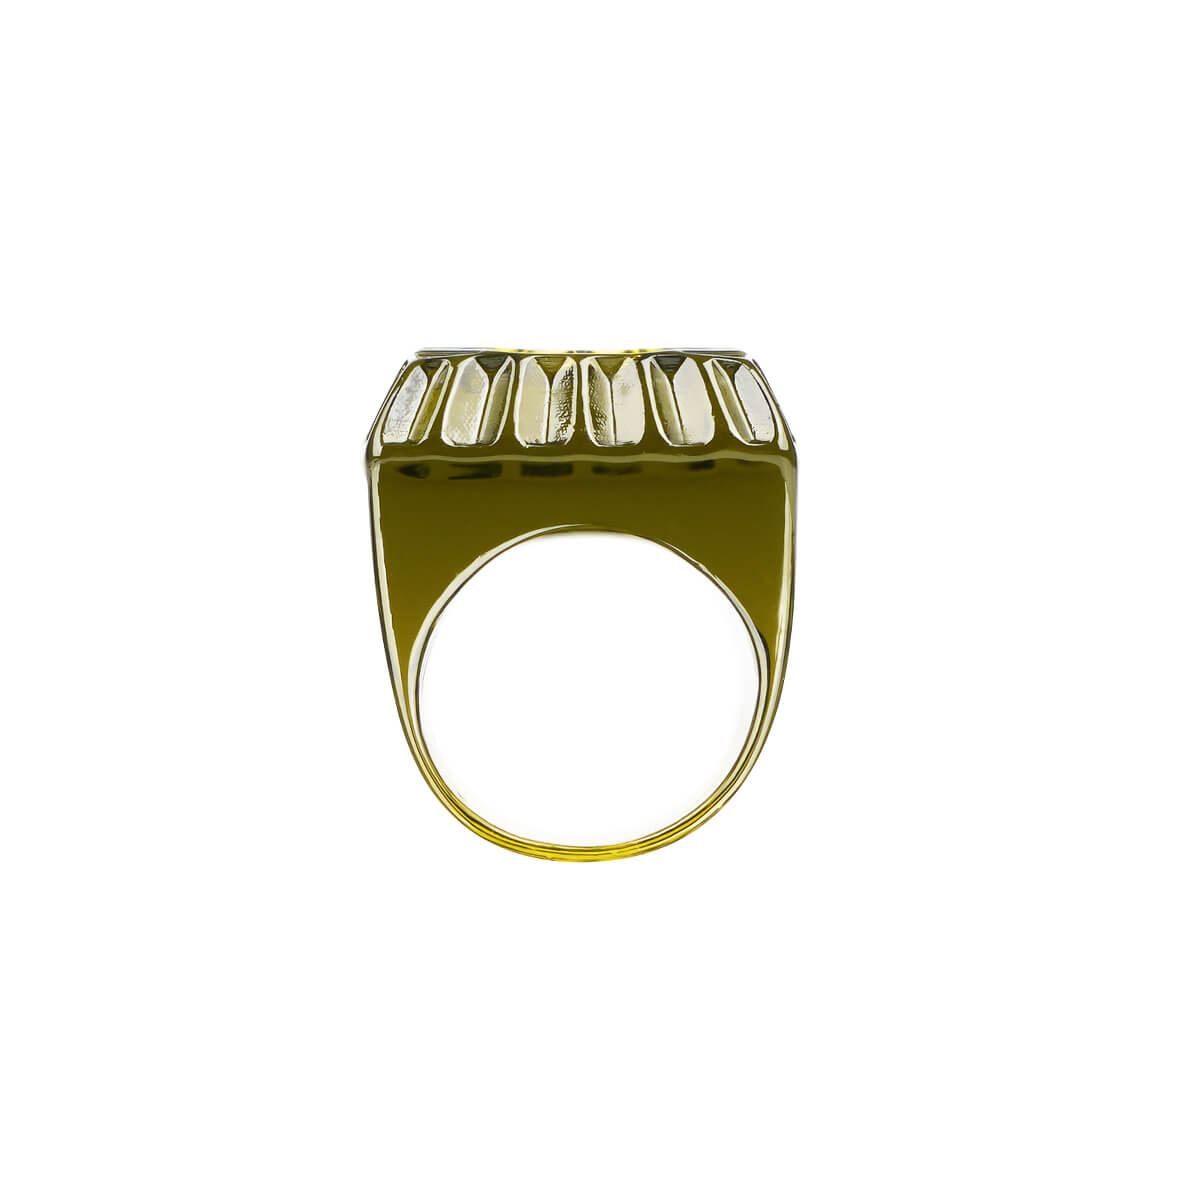 NEW IN Etched Square Ring Olive